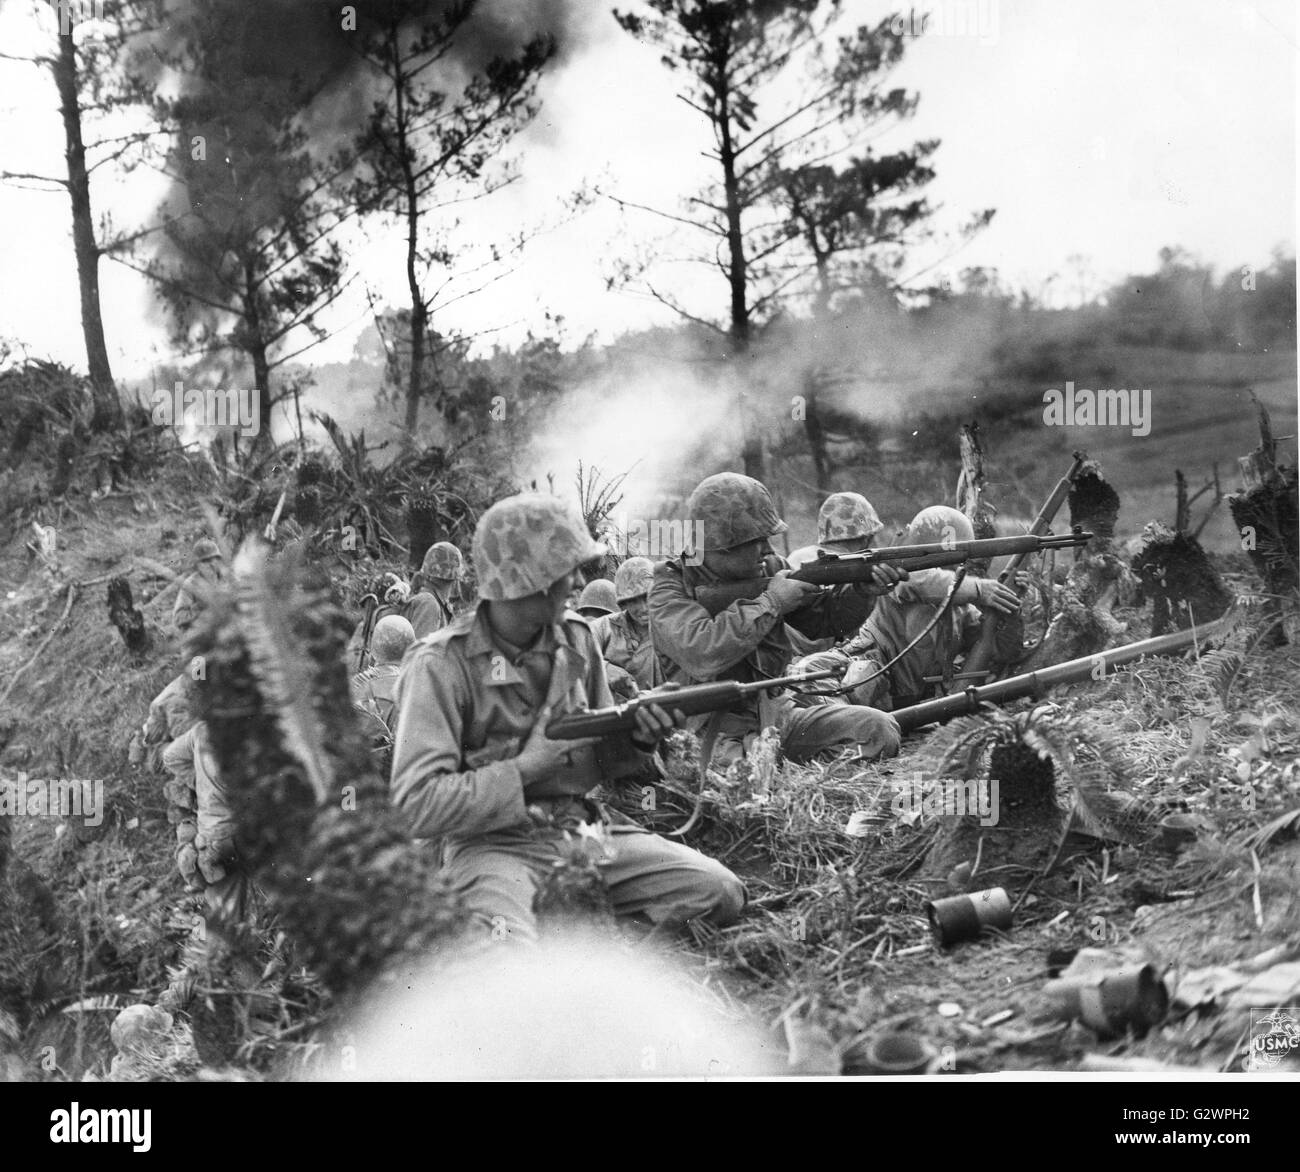 Marines battled a strong enemy force two miles north of the city of Naha on Okinawa for 48 hours before the position was captured. Here amid shellbursts and rifle fire, the Leathernecks prepare for the drive into the town. Stock Photo